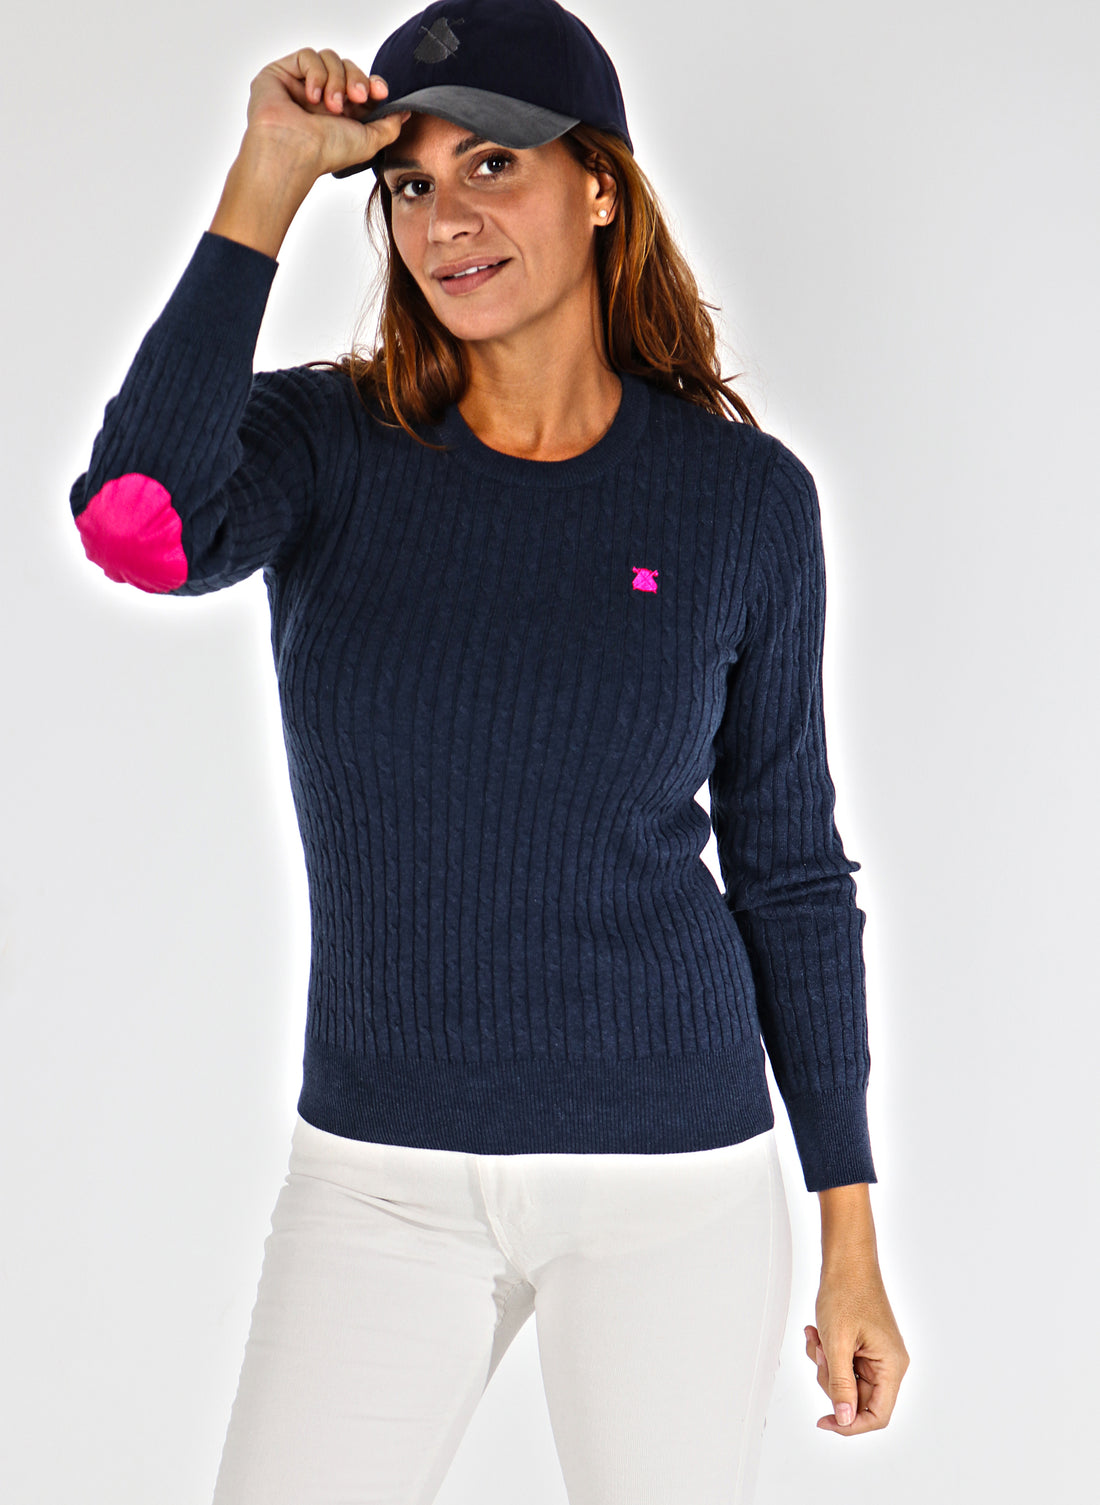 Women's Navy Blue Cable Knit Sweater with Elbow Patches.